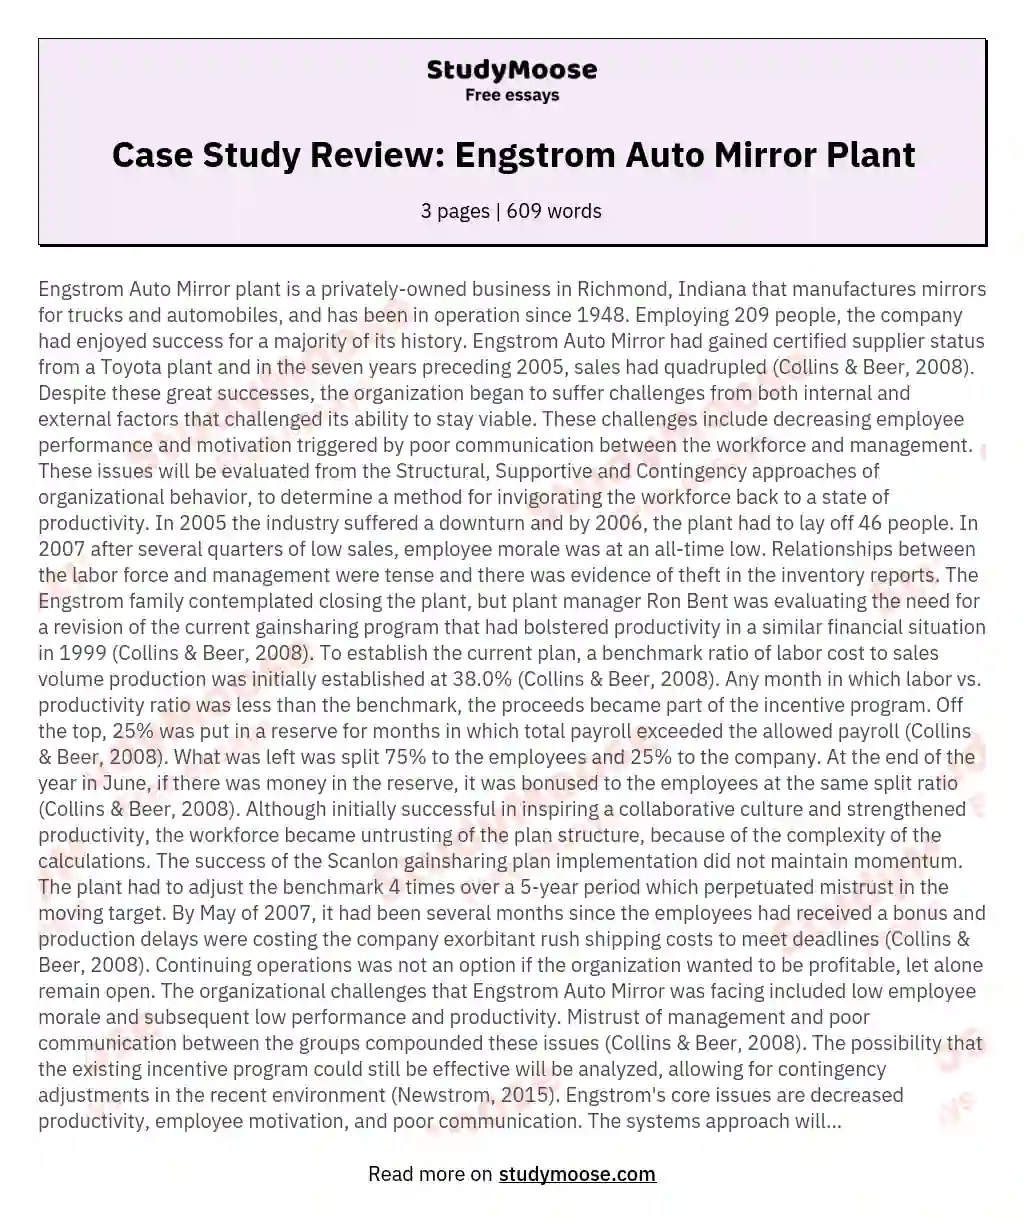 Case Study Review: Engstrom Auto Mirror Plant essay